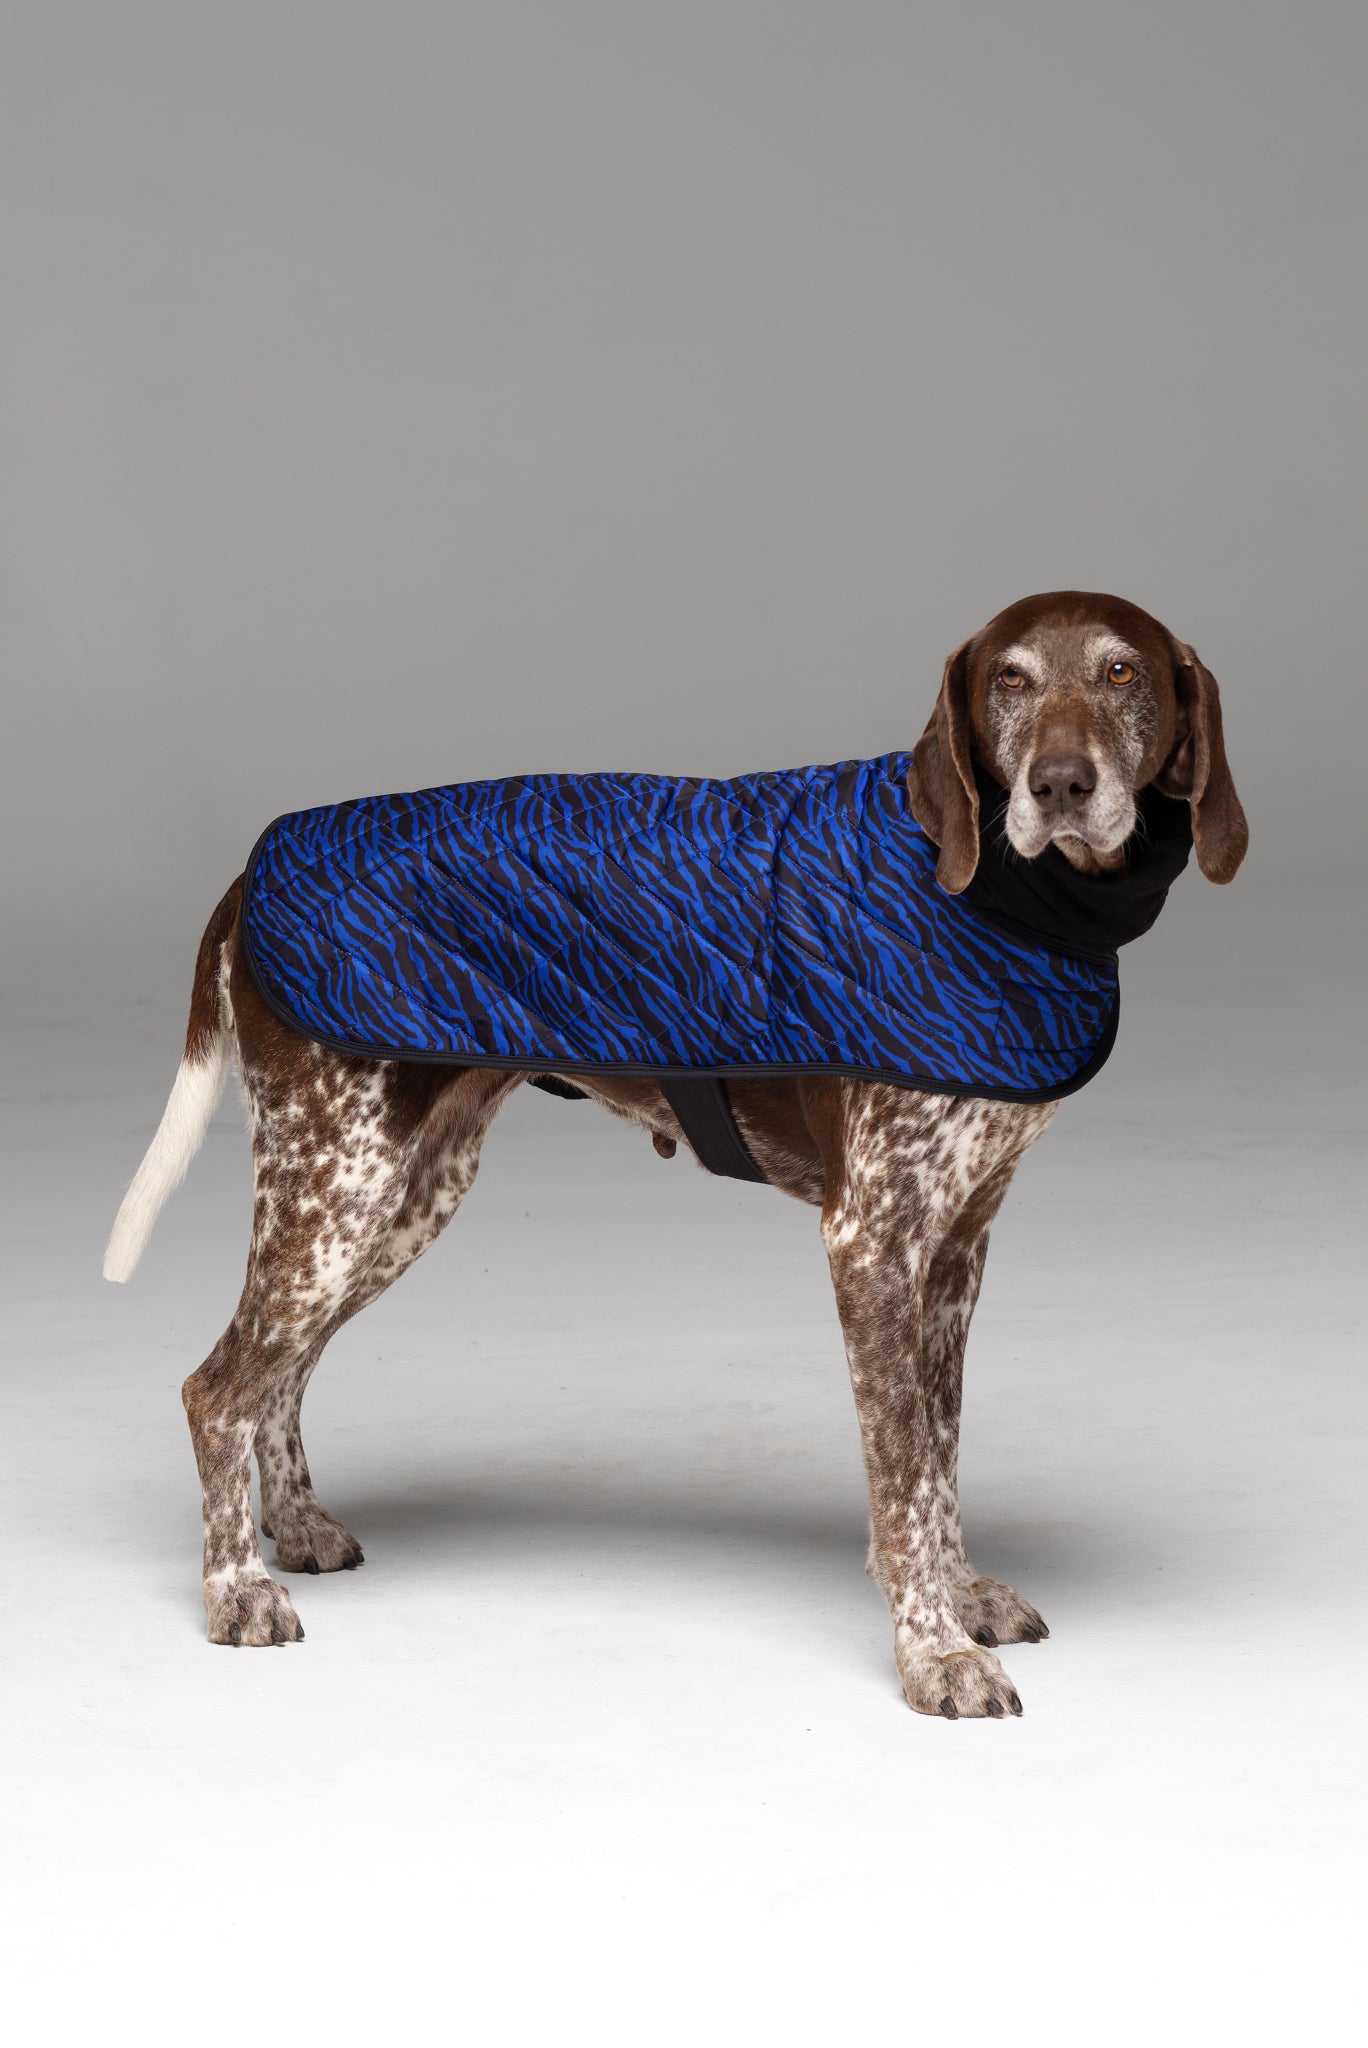 Liberbarkce Dog Coat in Blue Zebra side profile showing snood scarf and strap underneath chest.